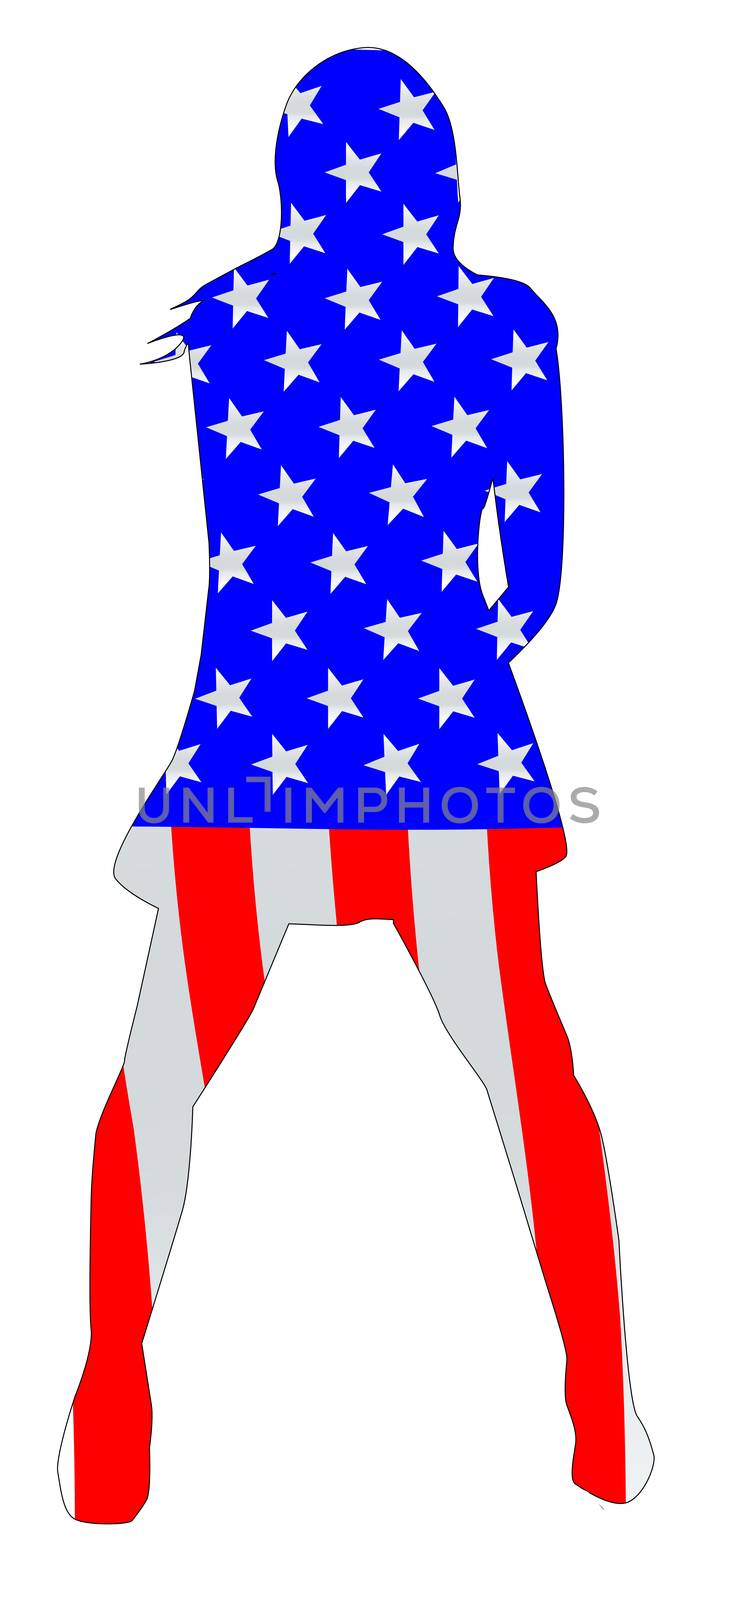 A grungy background with the faded silhouette of a female performer with the Stars and Stripes flag